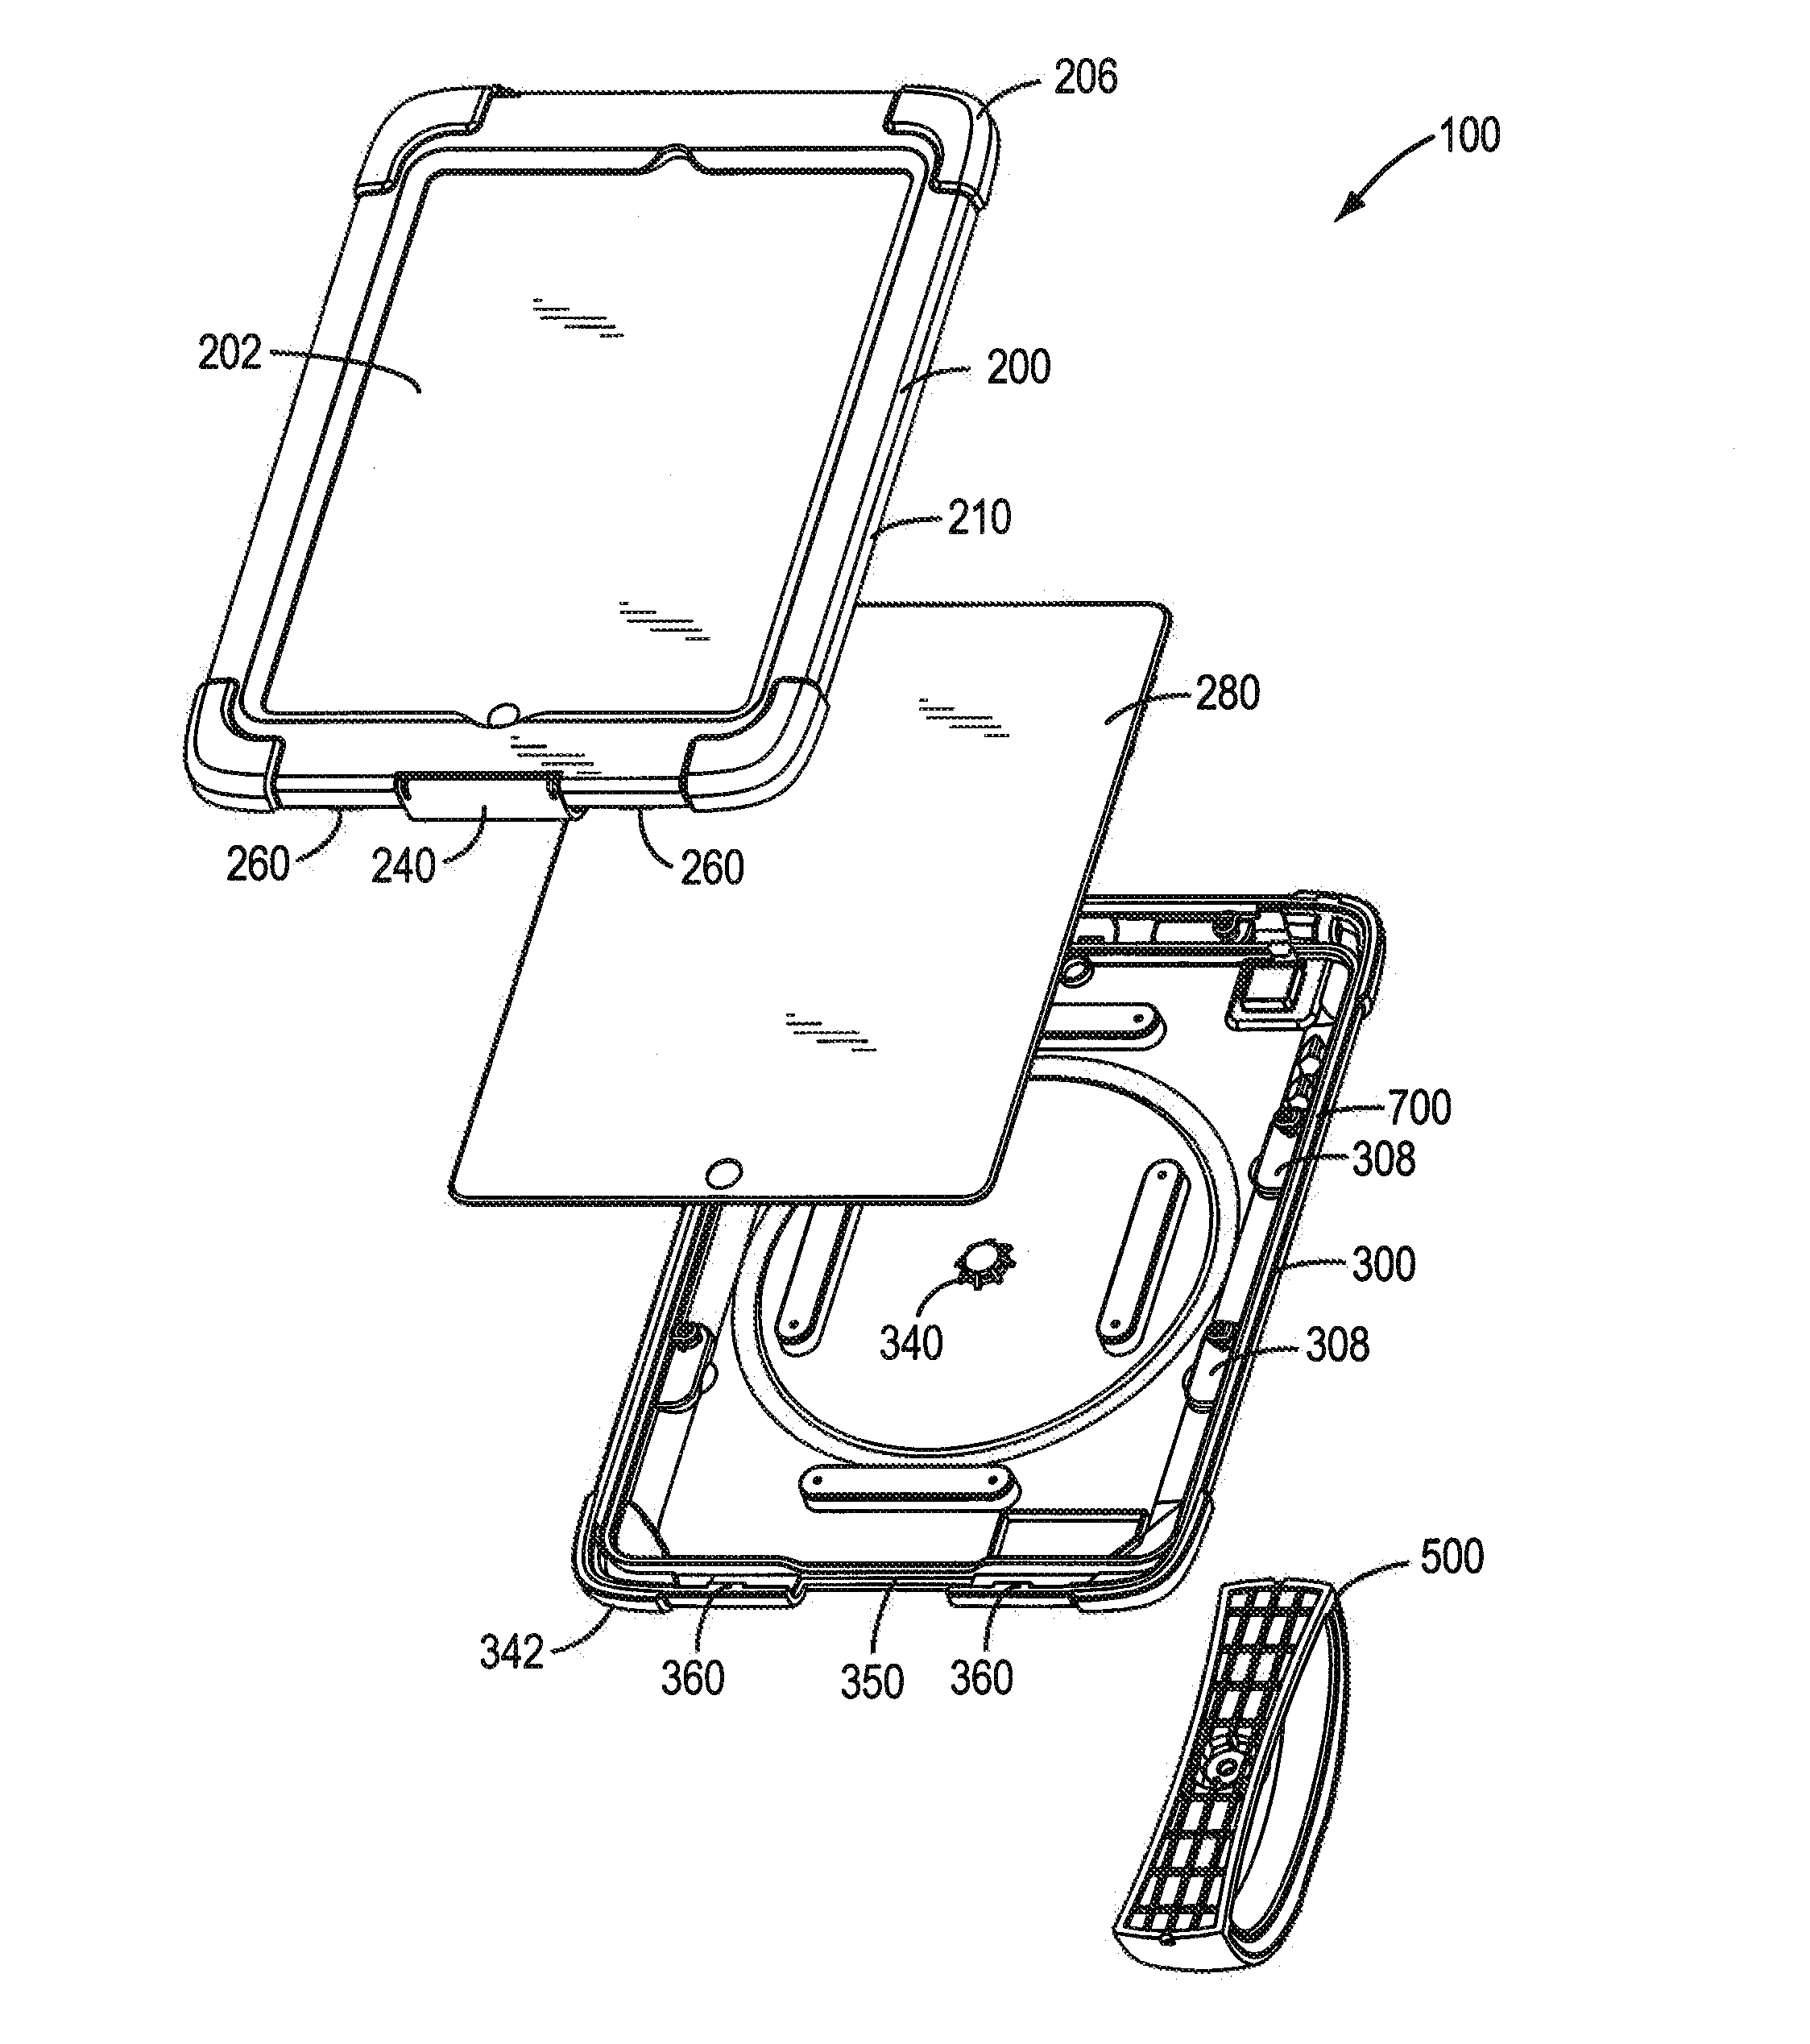 Protective casing providing impact absorption and water resistance for portable electronic devices